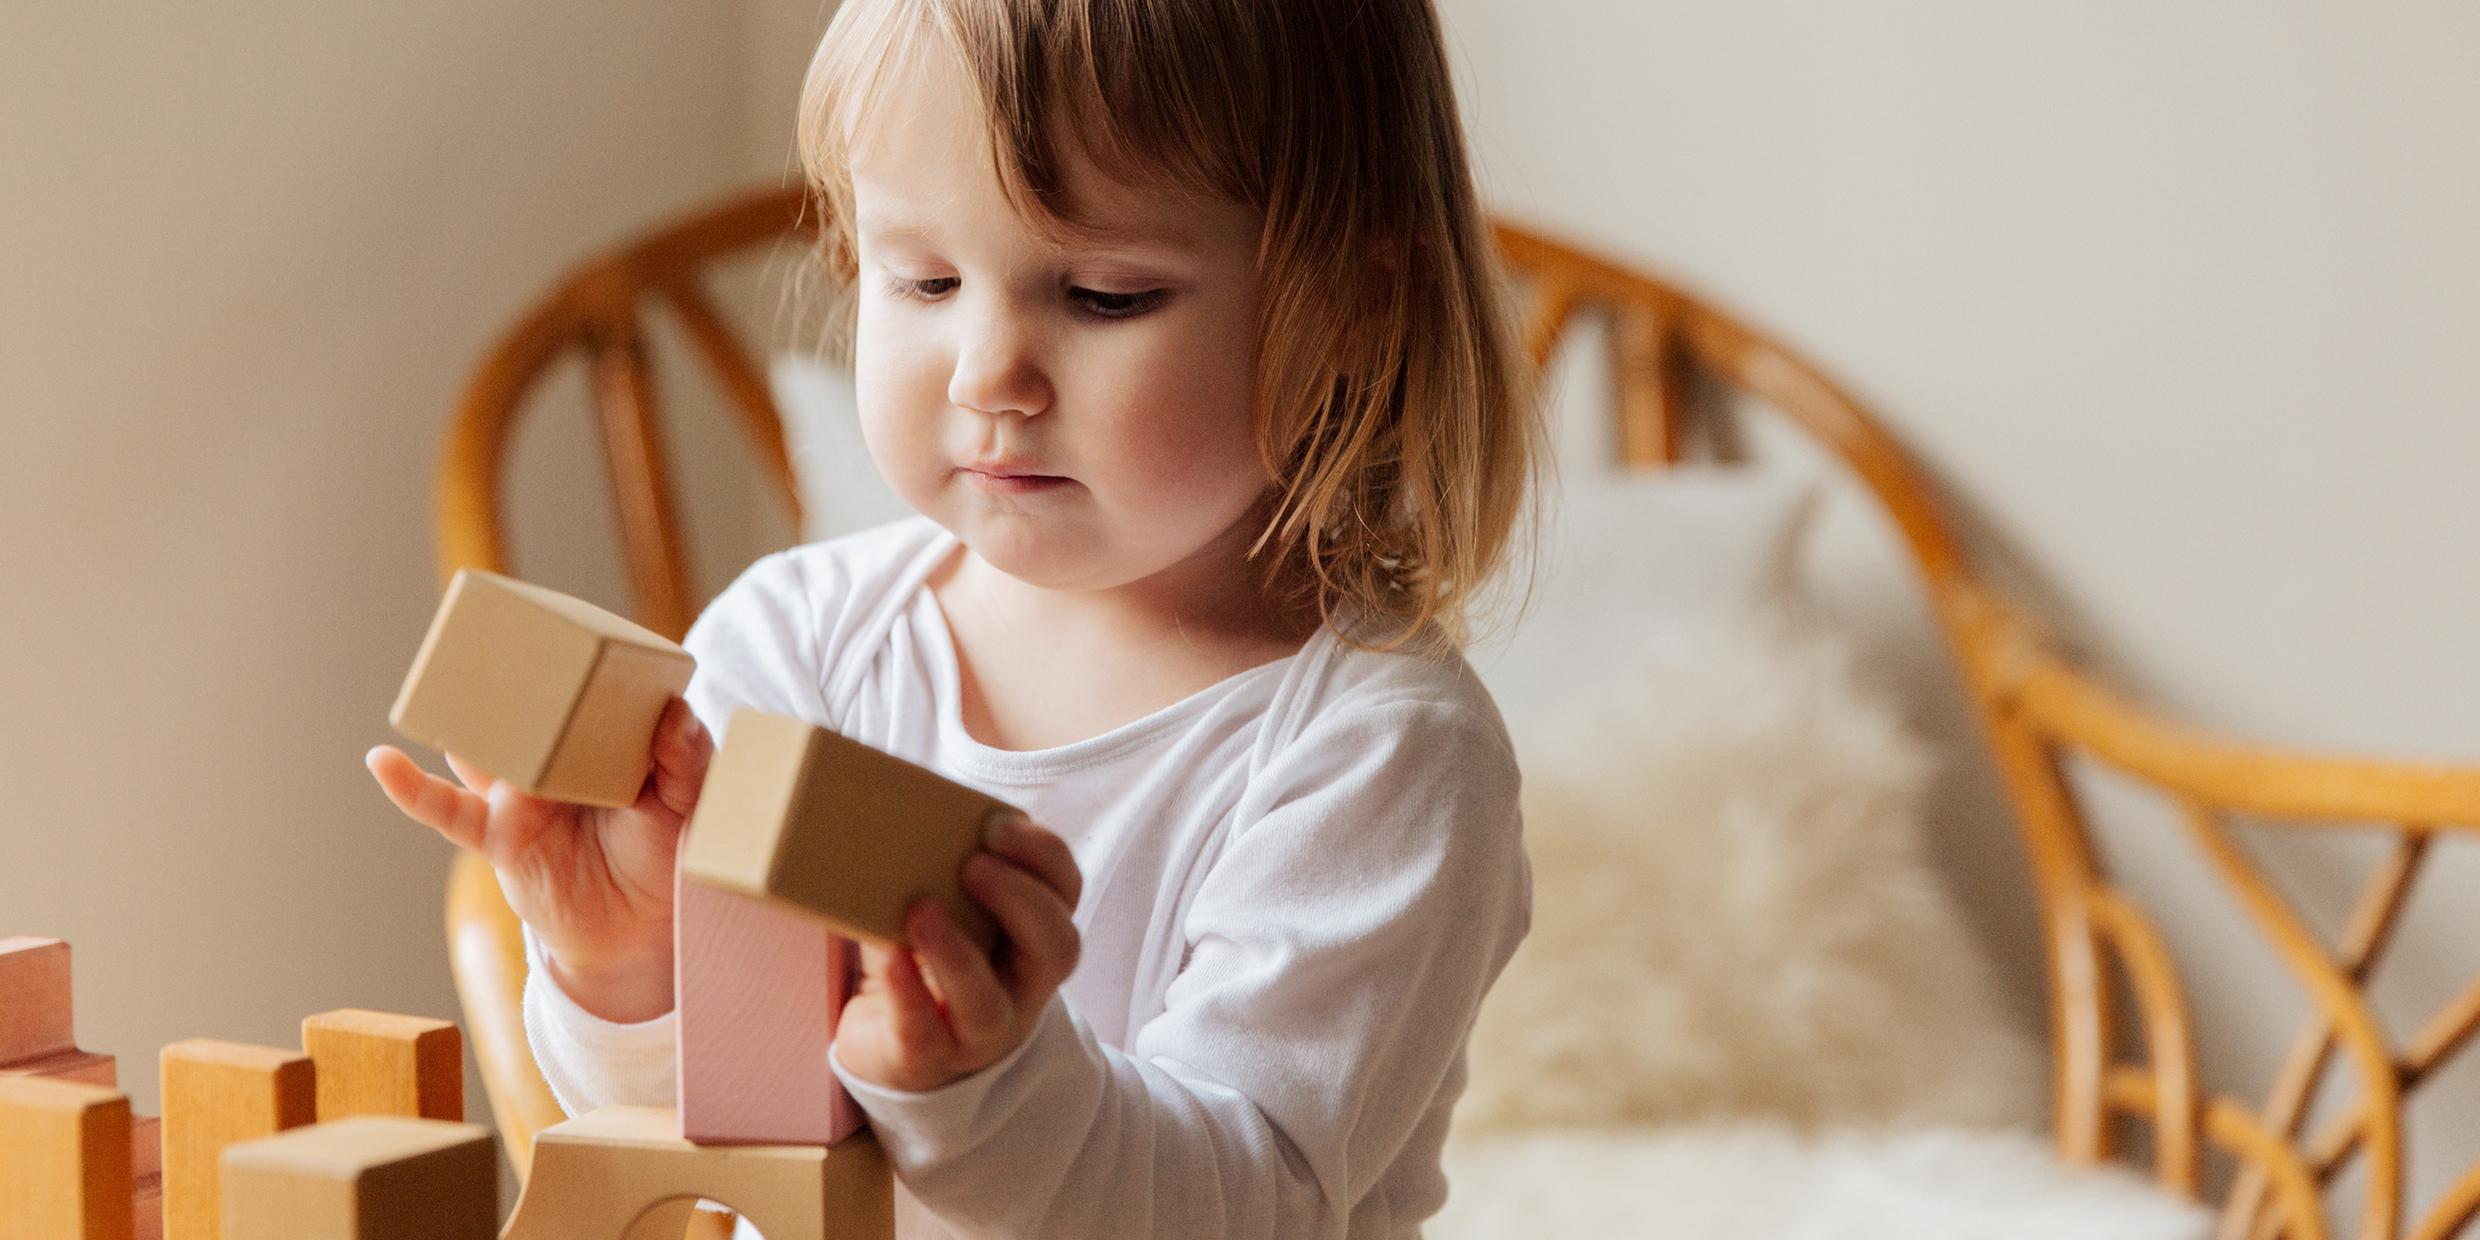 Image of a toddler playing with wooden blocks